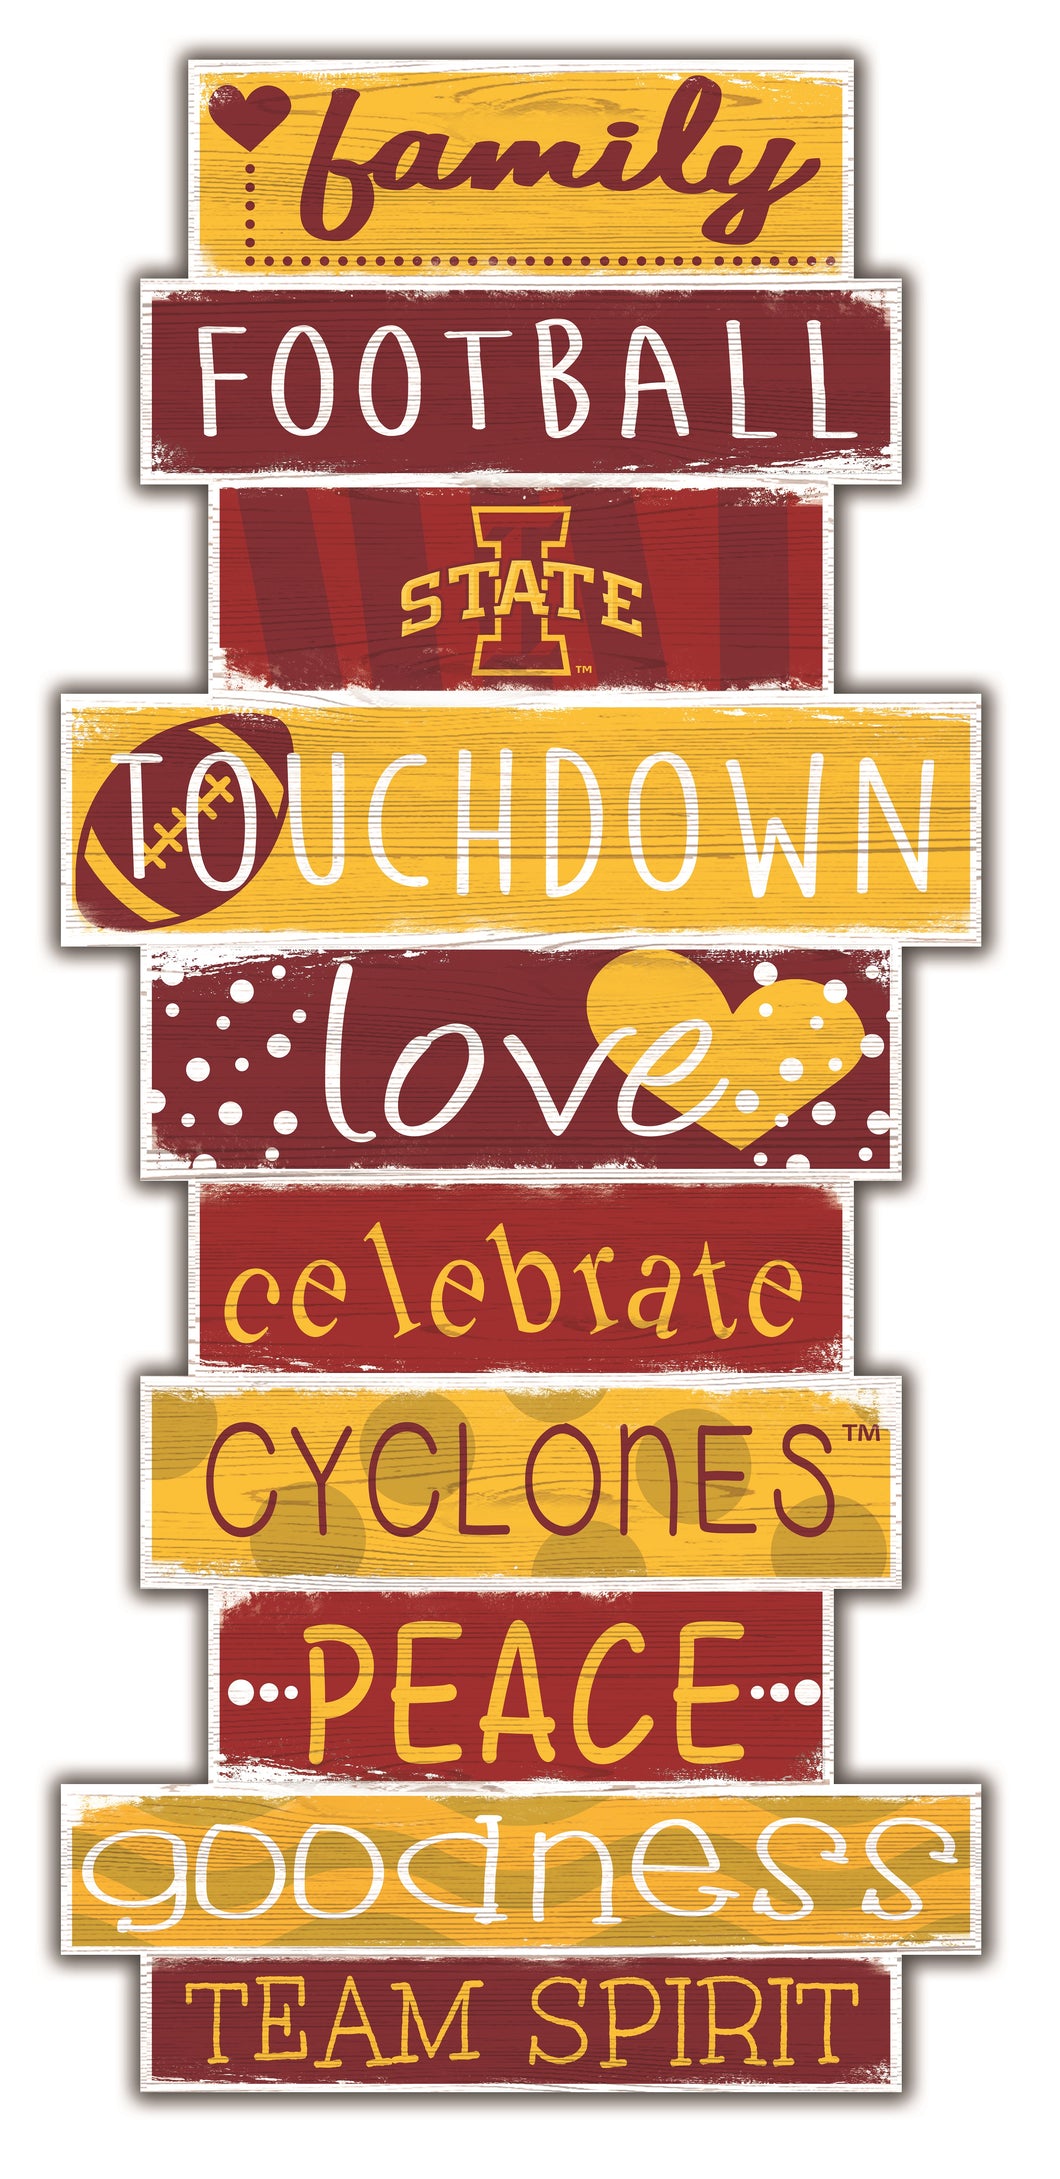 Iowa State Cyclones Celebrations Stack Wood Sign -24